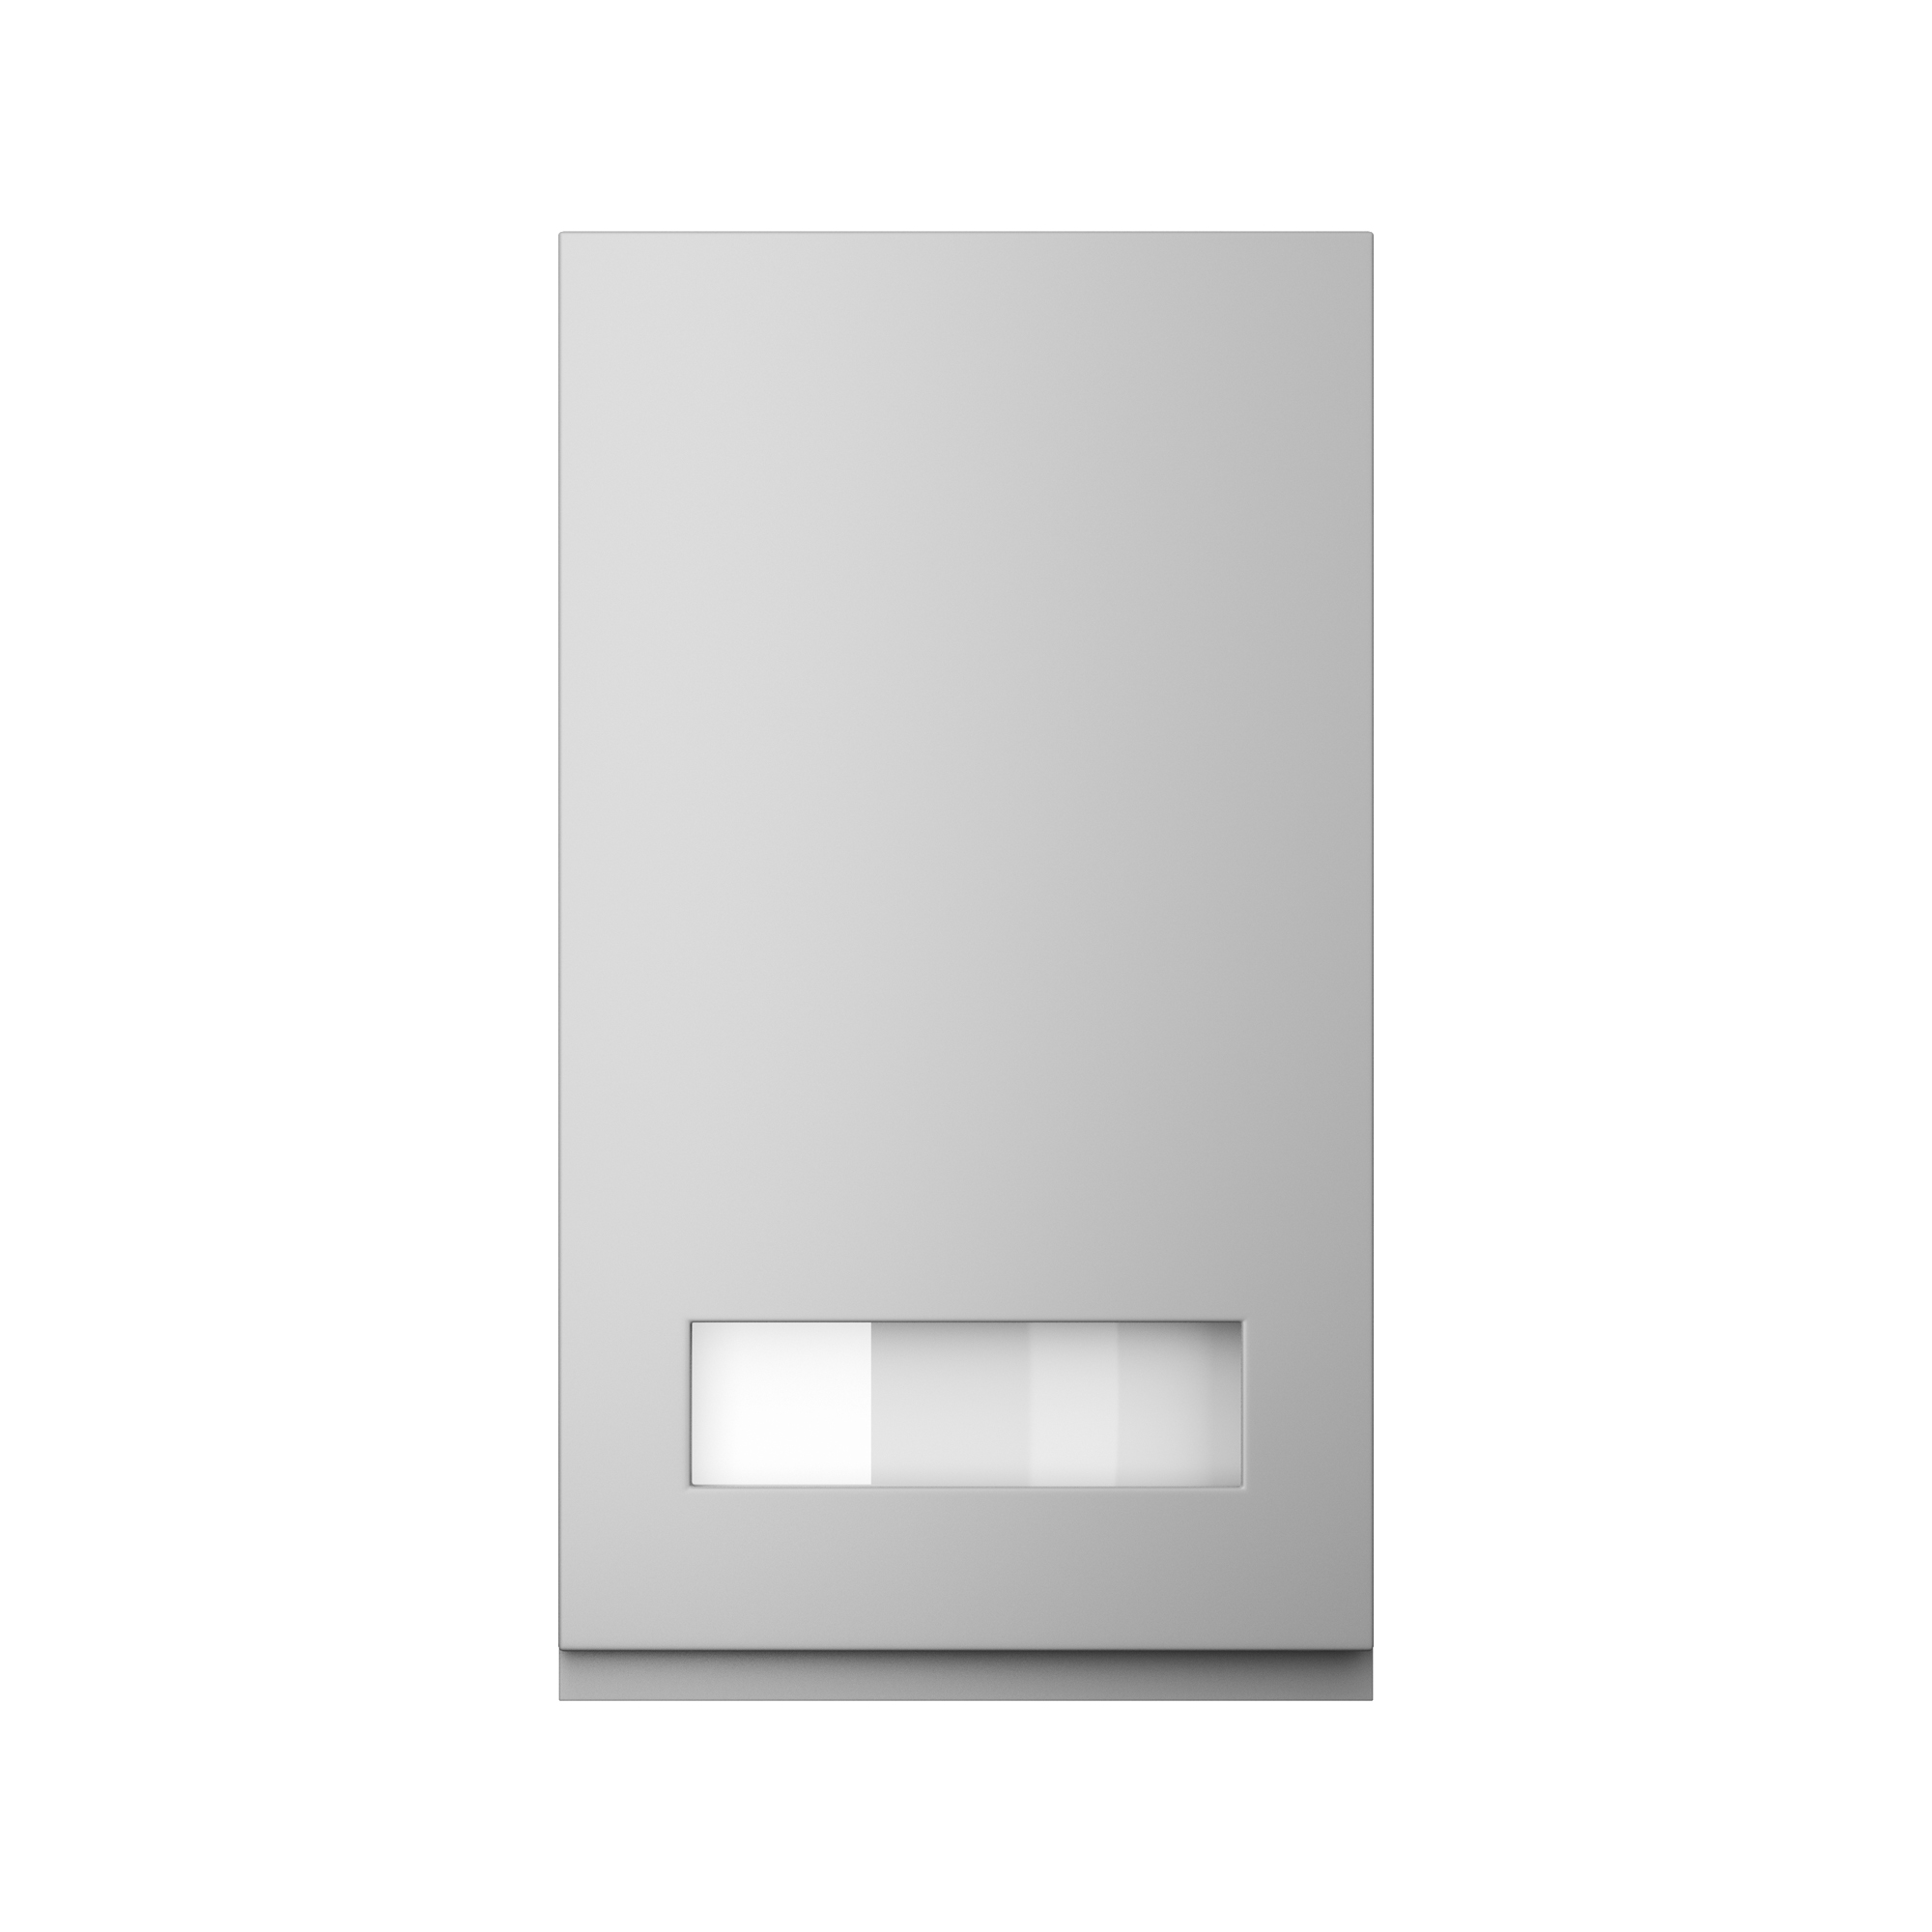 715 X 497 Letterbox Frame Includes Clear Glass - Strada Matte Painted Light Grey